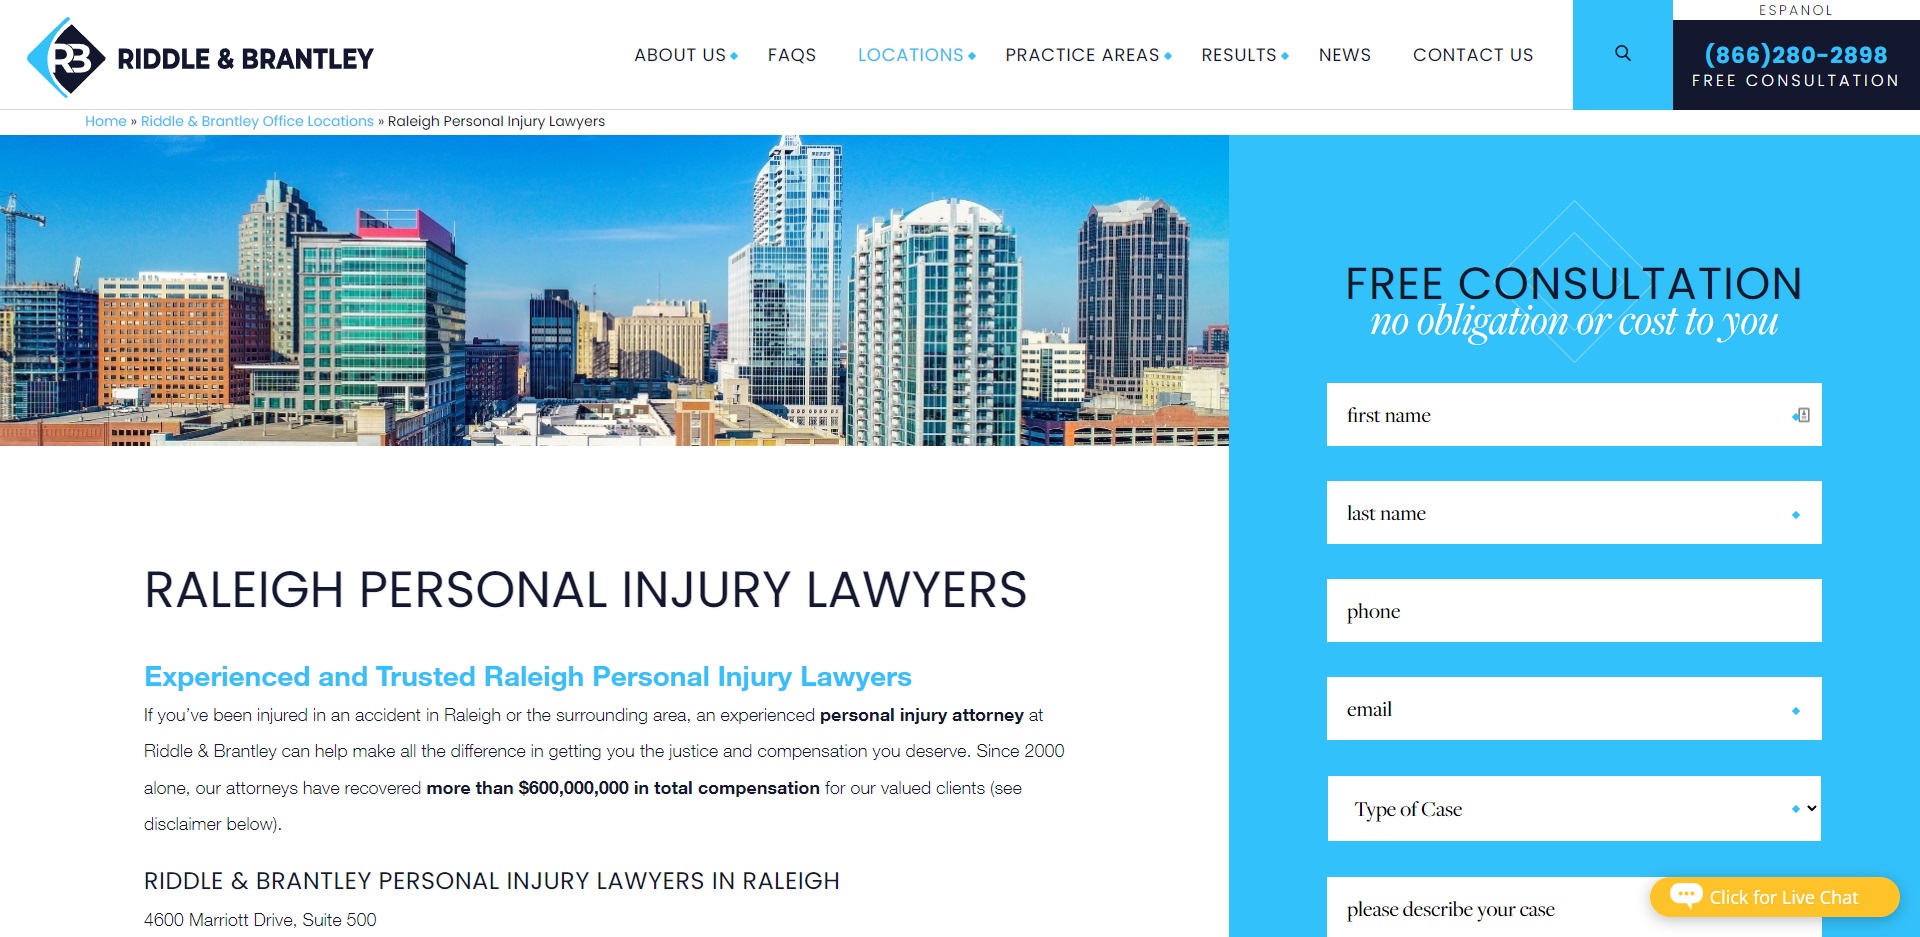 The Best Compensation Attorneys in Raleigh, NC